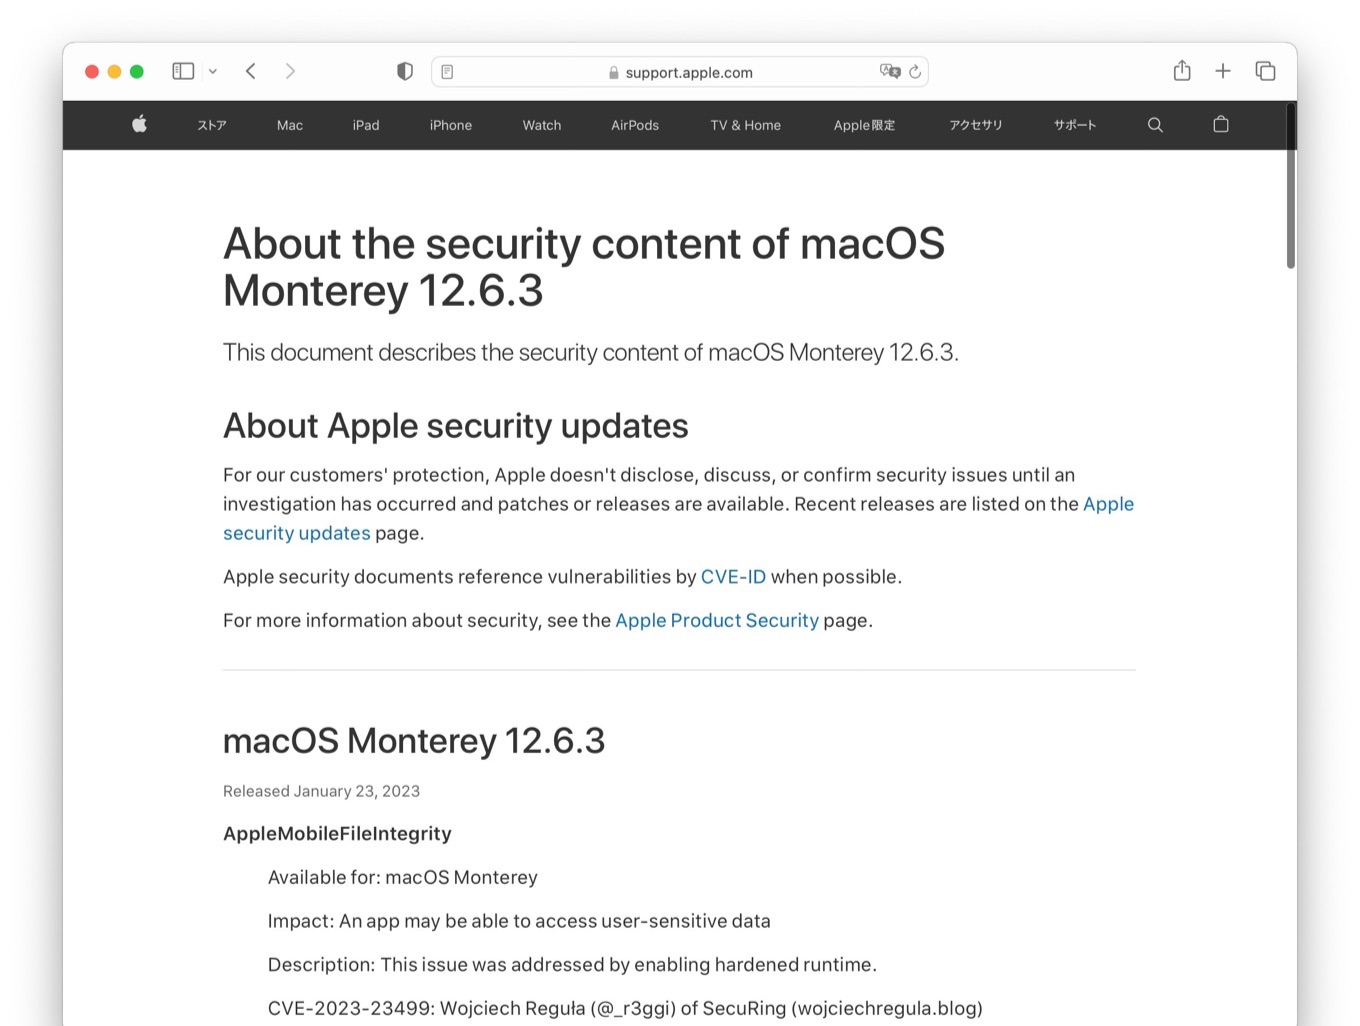 About the security content of macOS Monterey 12.6.3